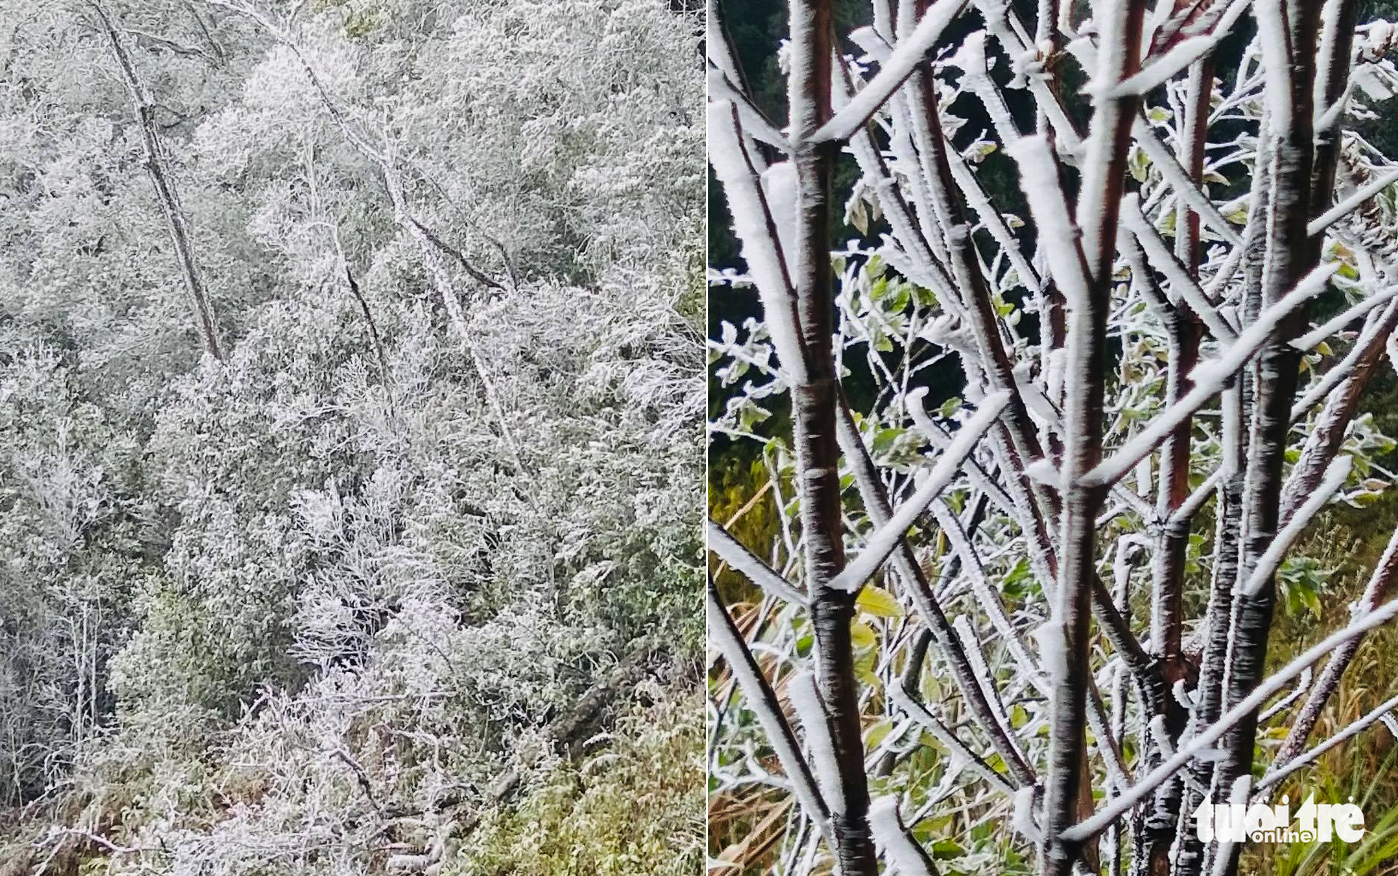 Frost covers trees in Ky Son District, Nghe An Province, Vietnam, December 18, 2022. Photo: N.Thang / Tuoi Tre